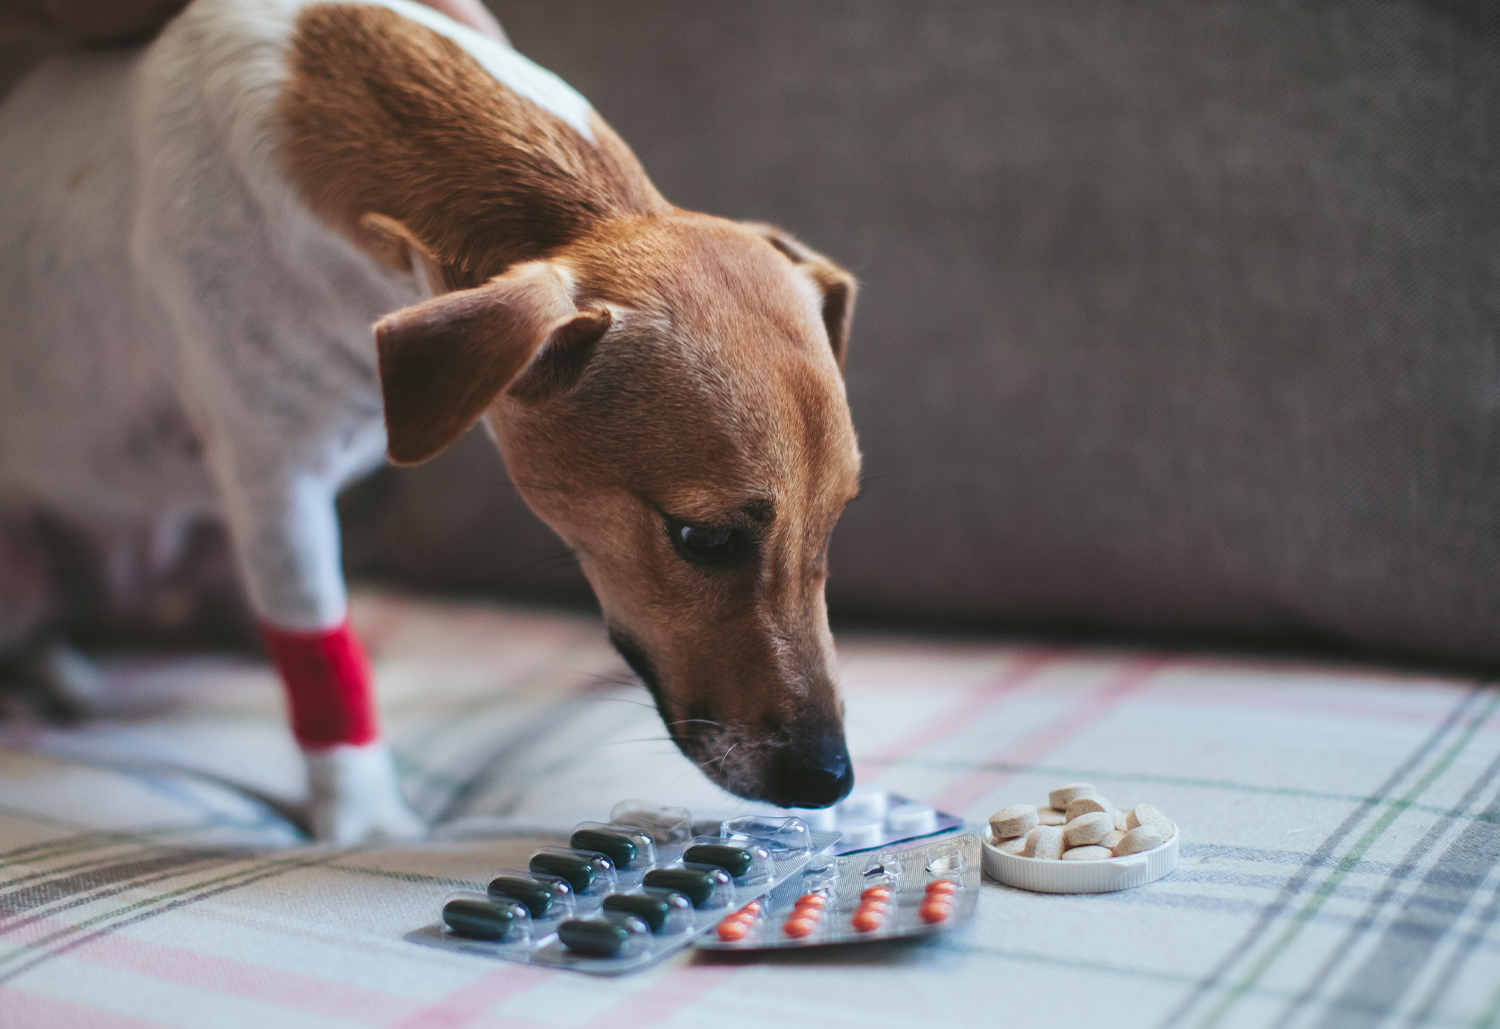 Dog With Medicine - How to split capsules